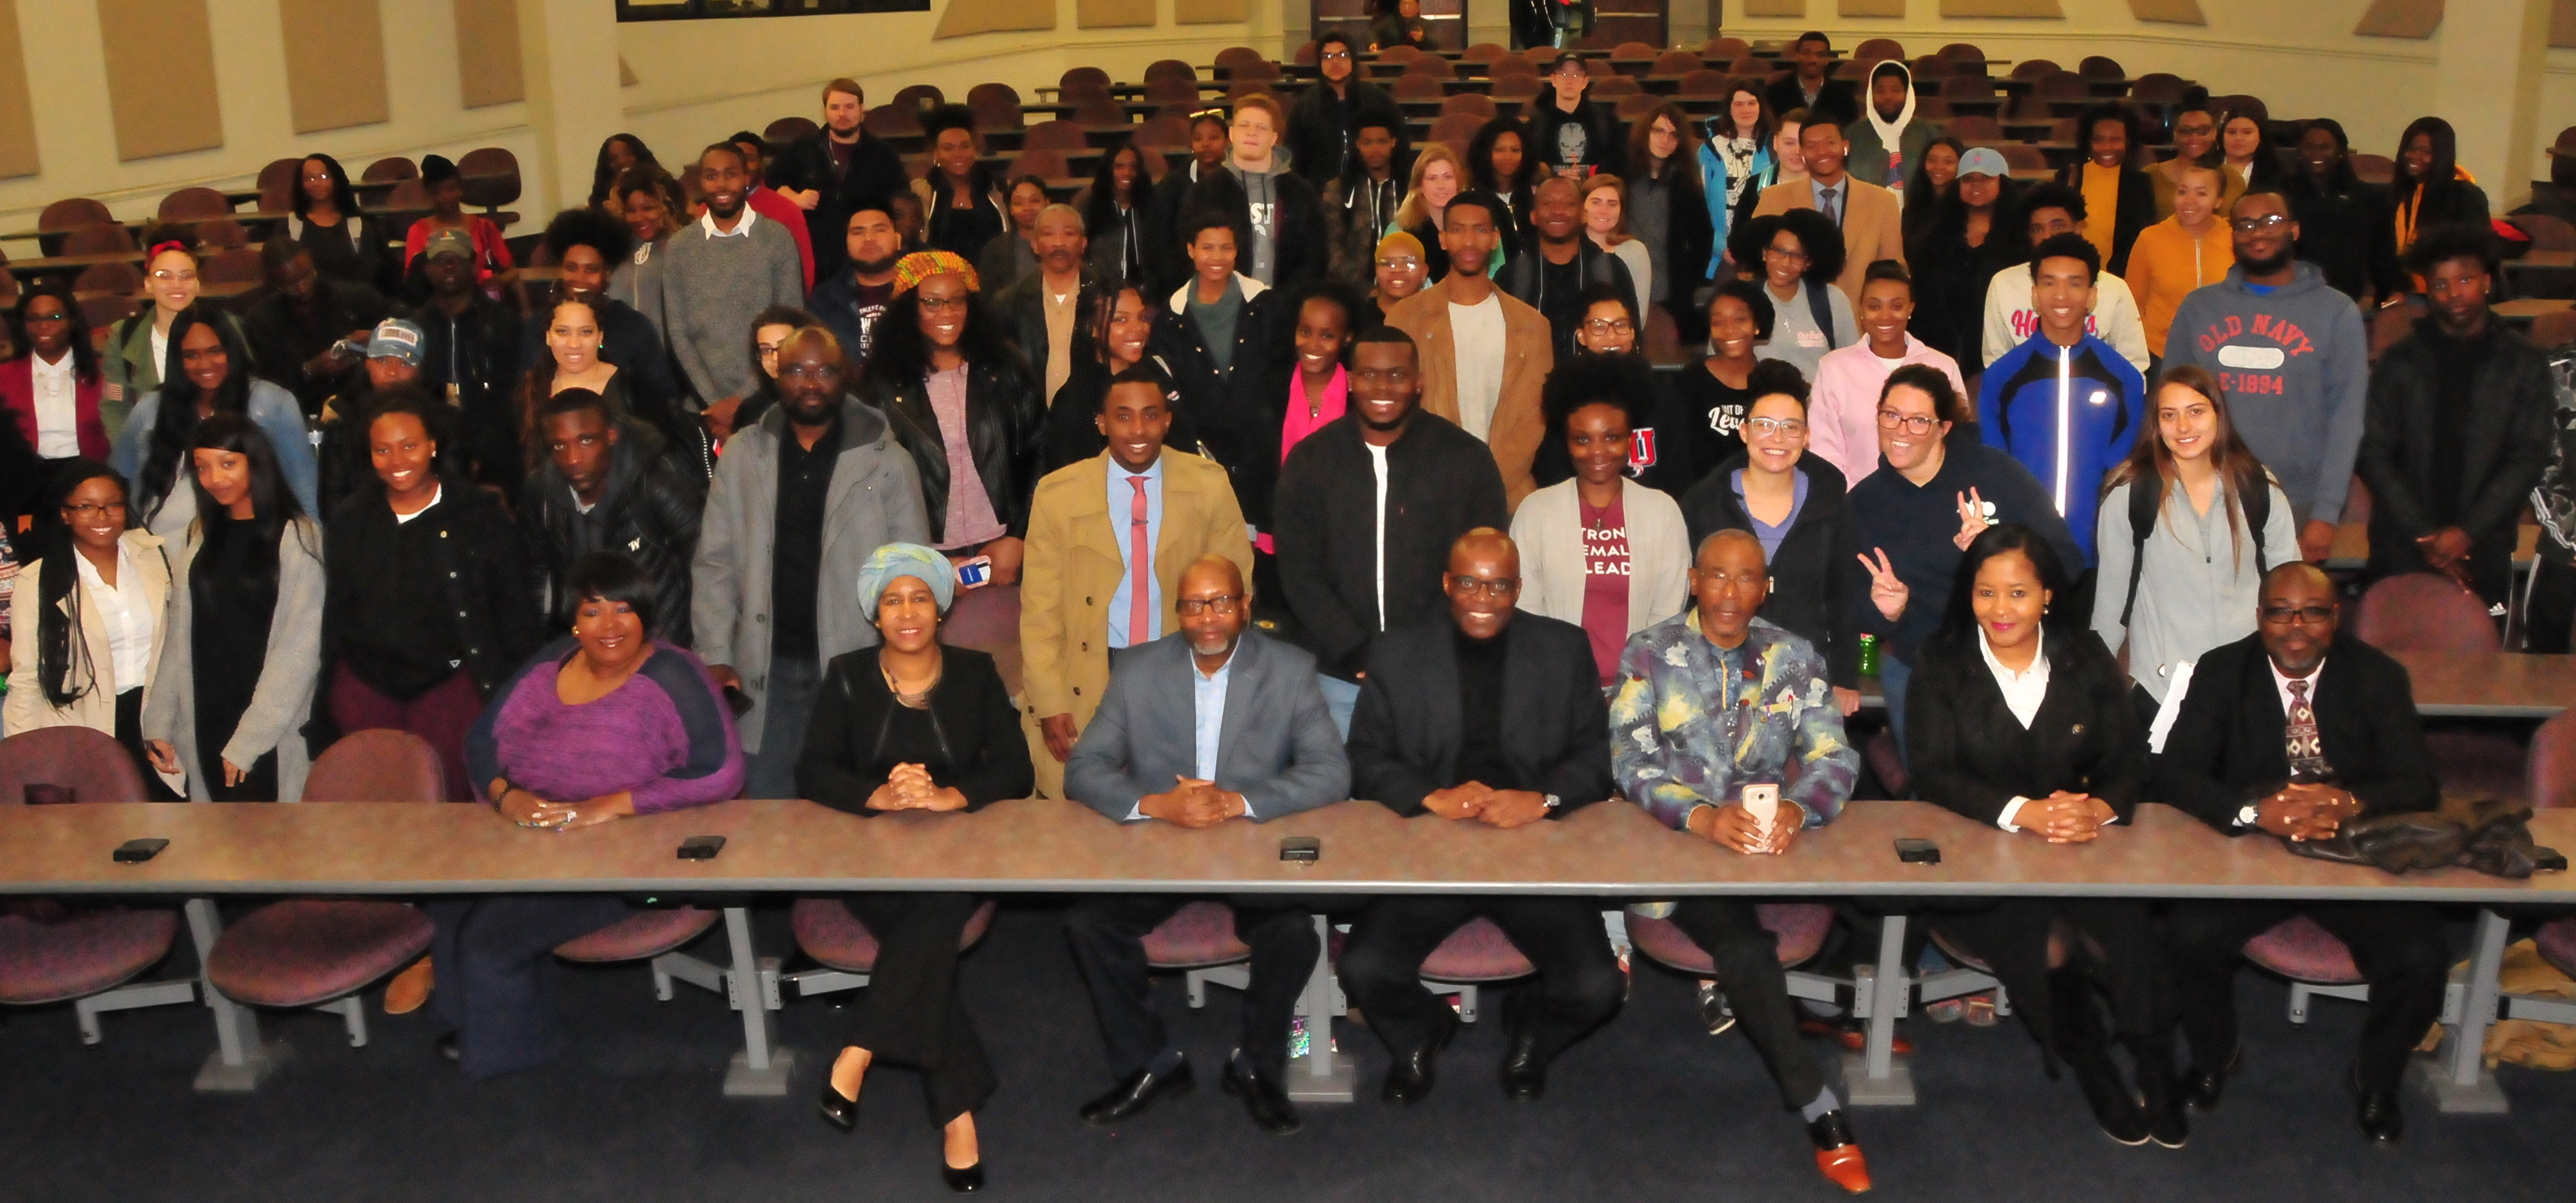 Dr. Eddy Maloka (seated center in dark suit) poses with the students who were his audience.